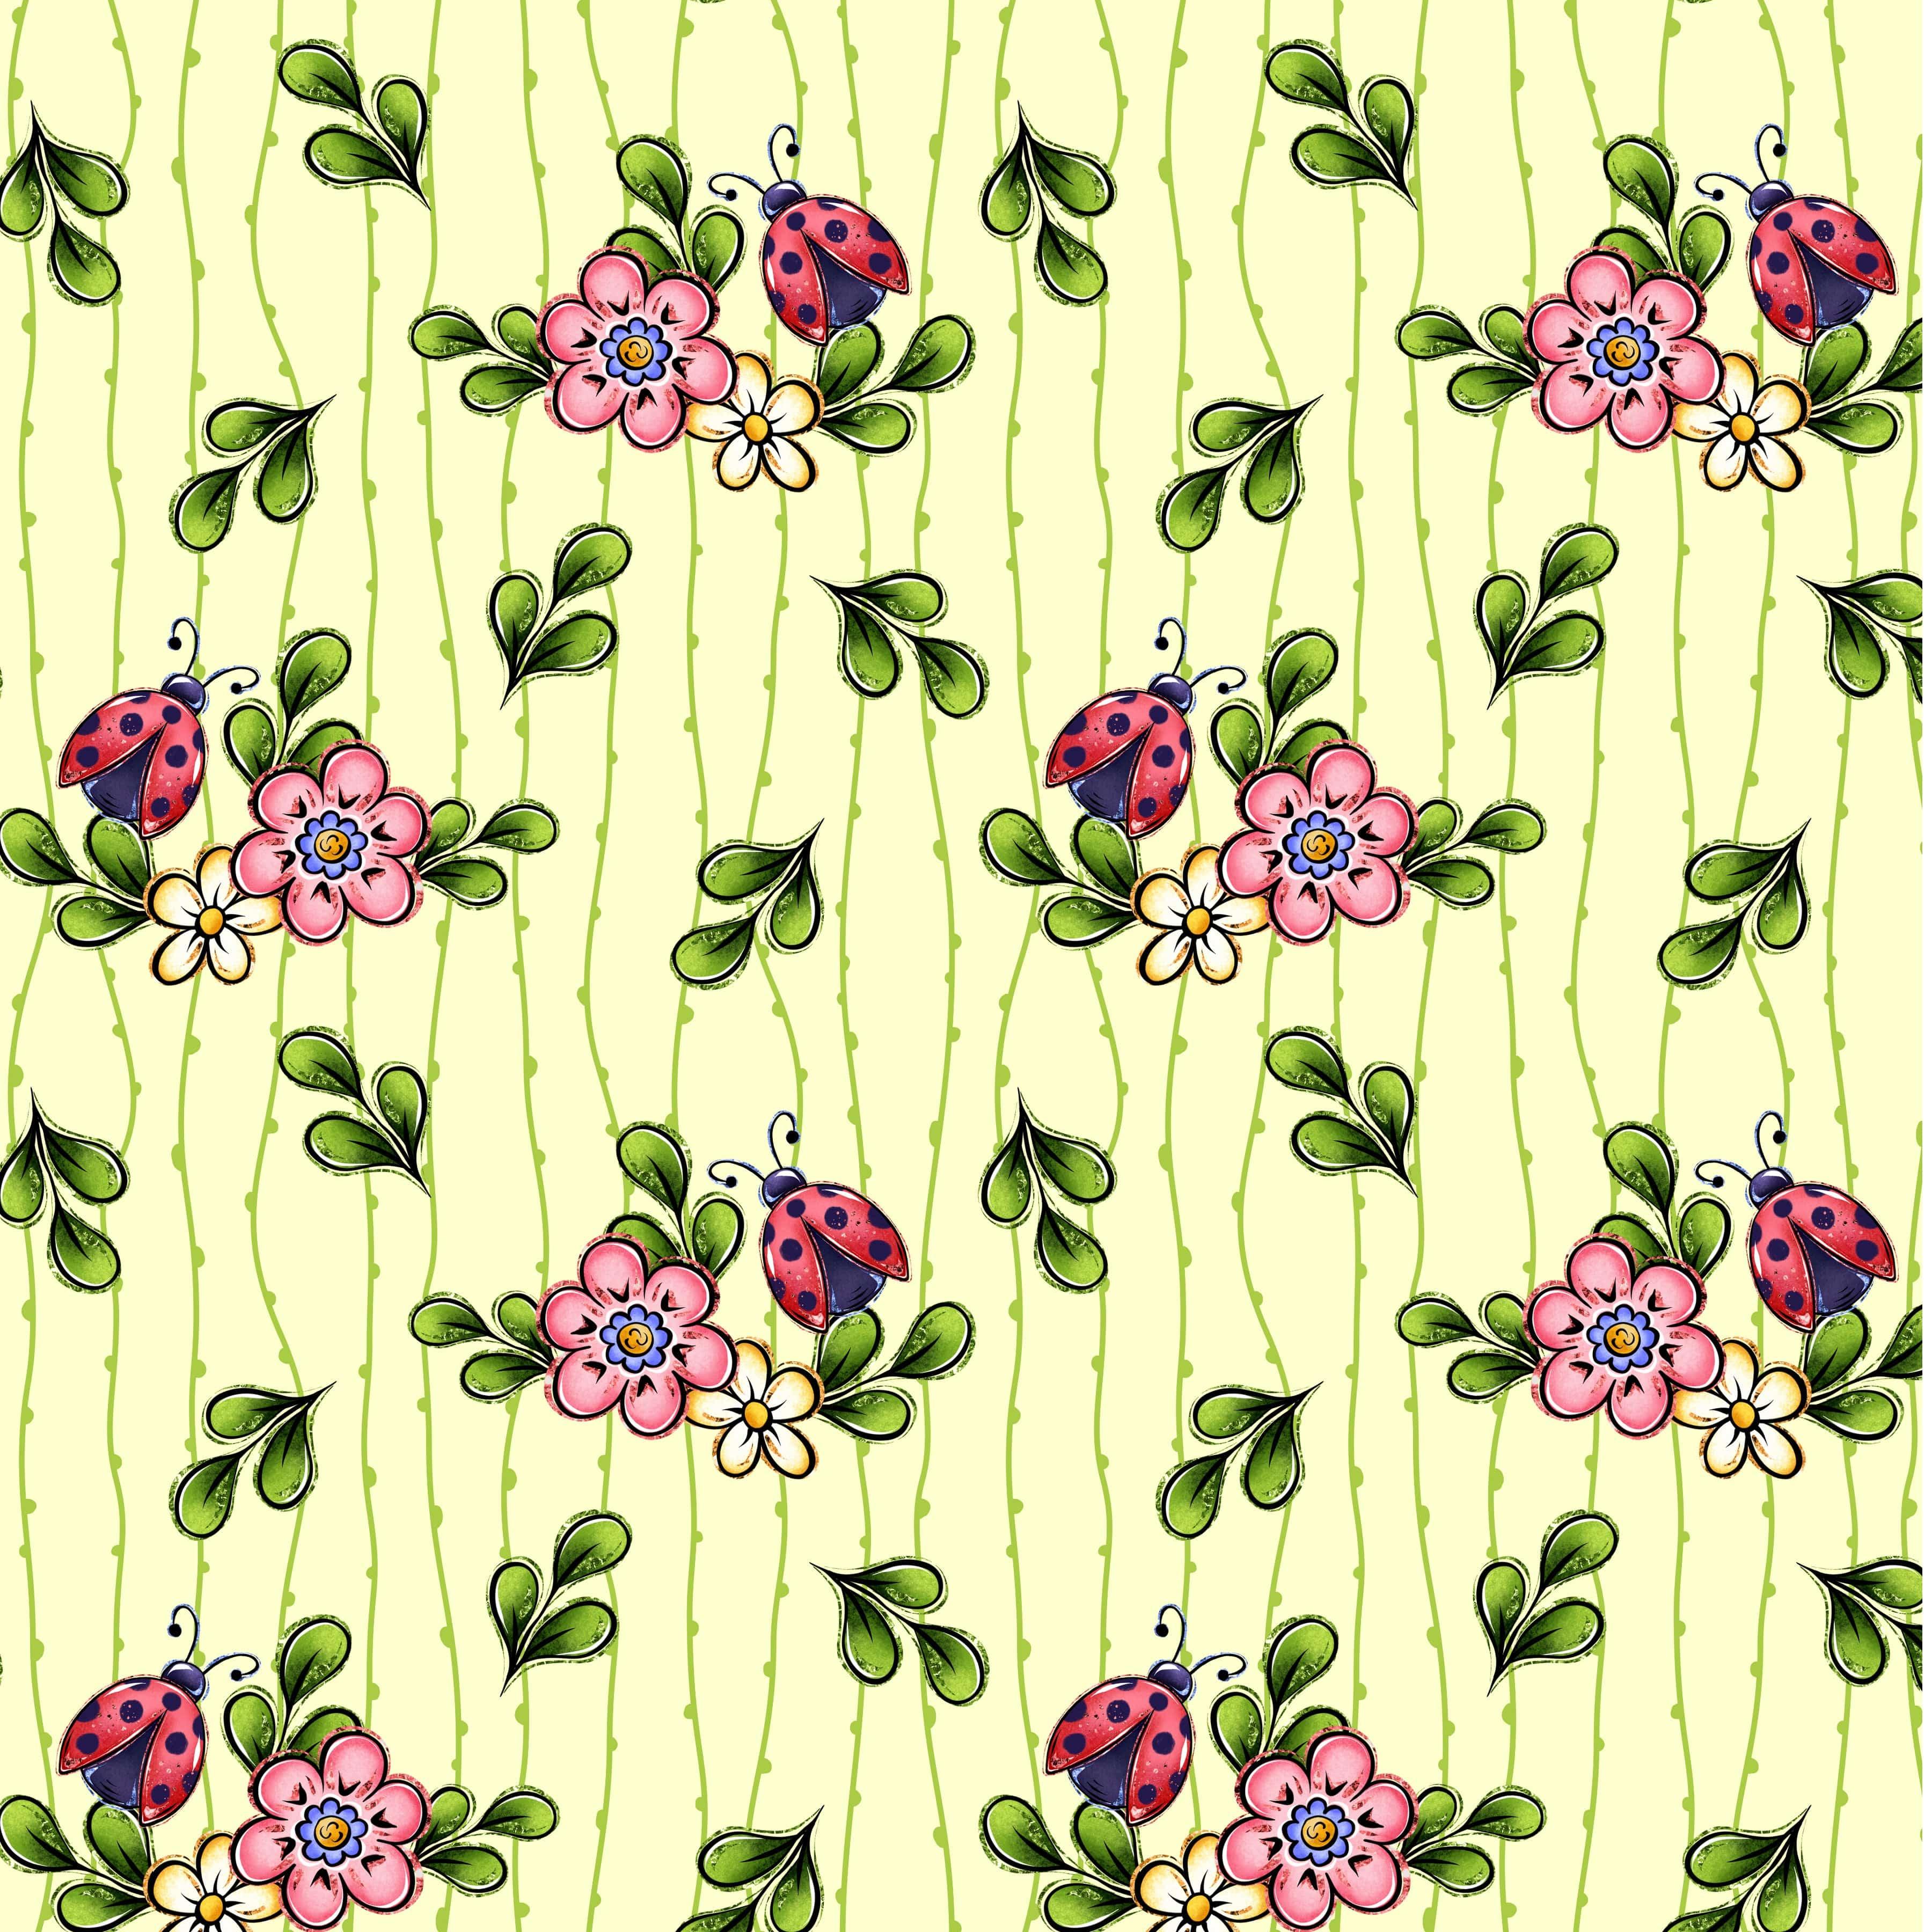  Frogs In The Morass Collection Frogs & Mushrooms 12 x 12 Double-Sided Scrapbook Paper by SSC Designs - Scrapbook Supply Companies